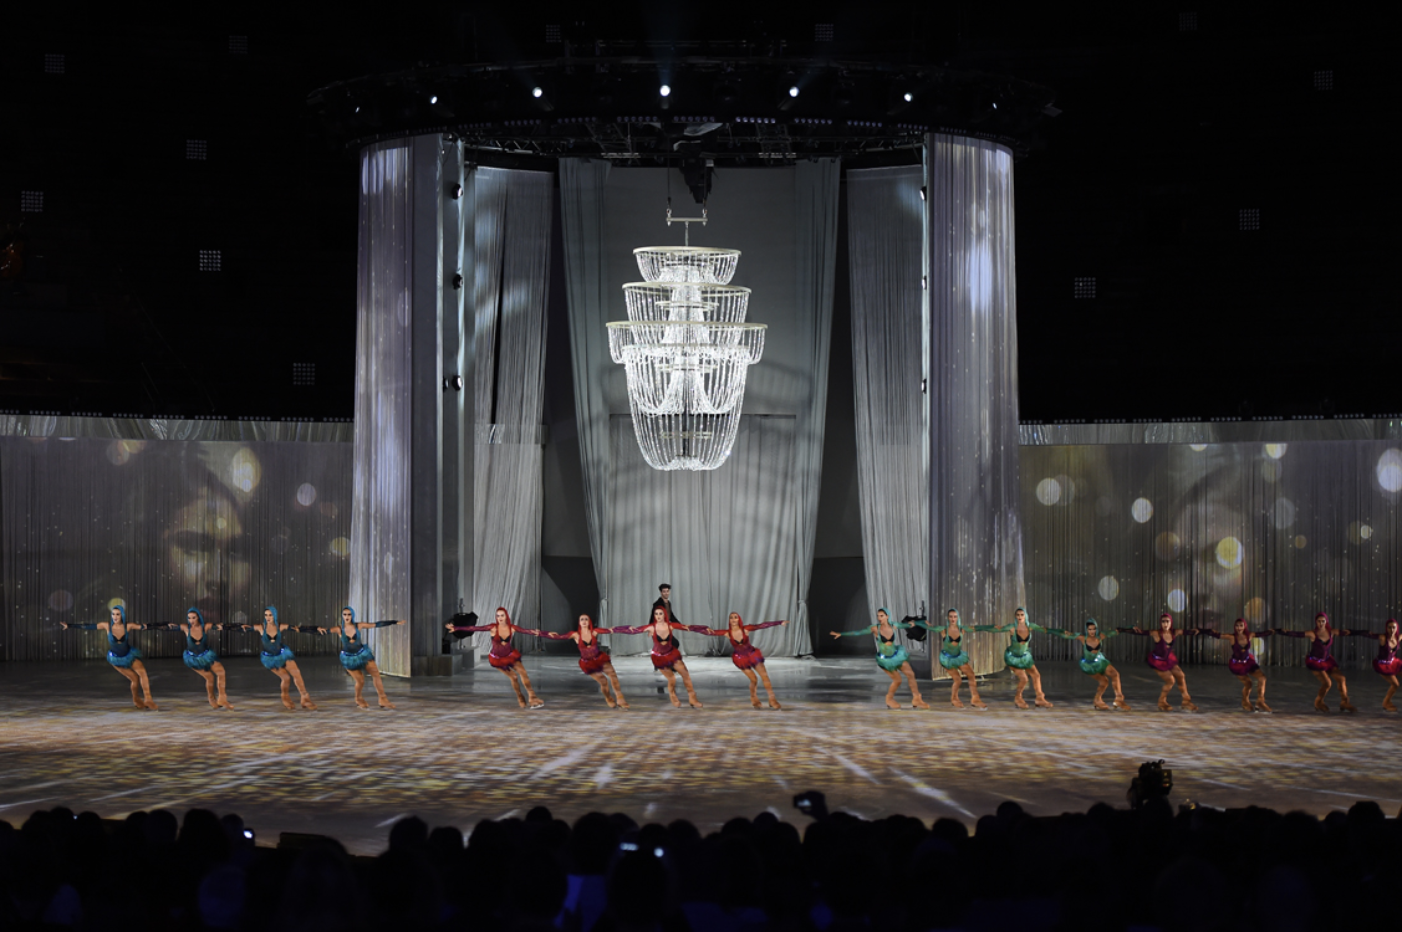 Intimissimi on ice 2015: the mistery of desire